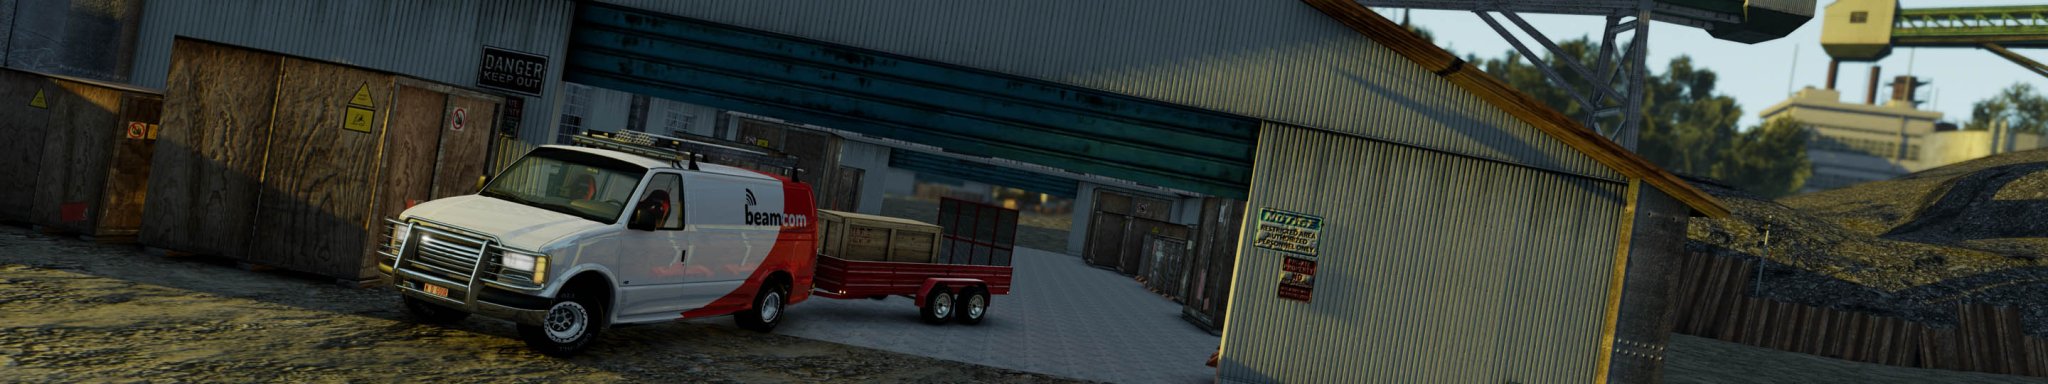 0 BeamNG FAIRHAVEN Gavril D SERIES with RED TRAILER copoy.jpg